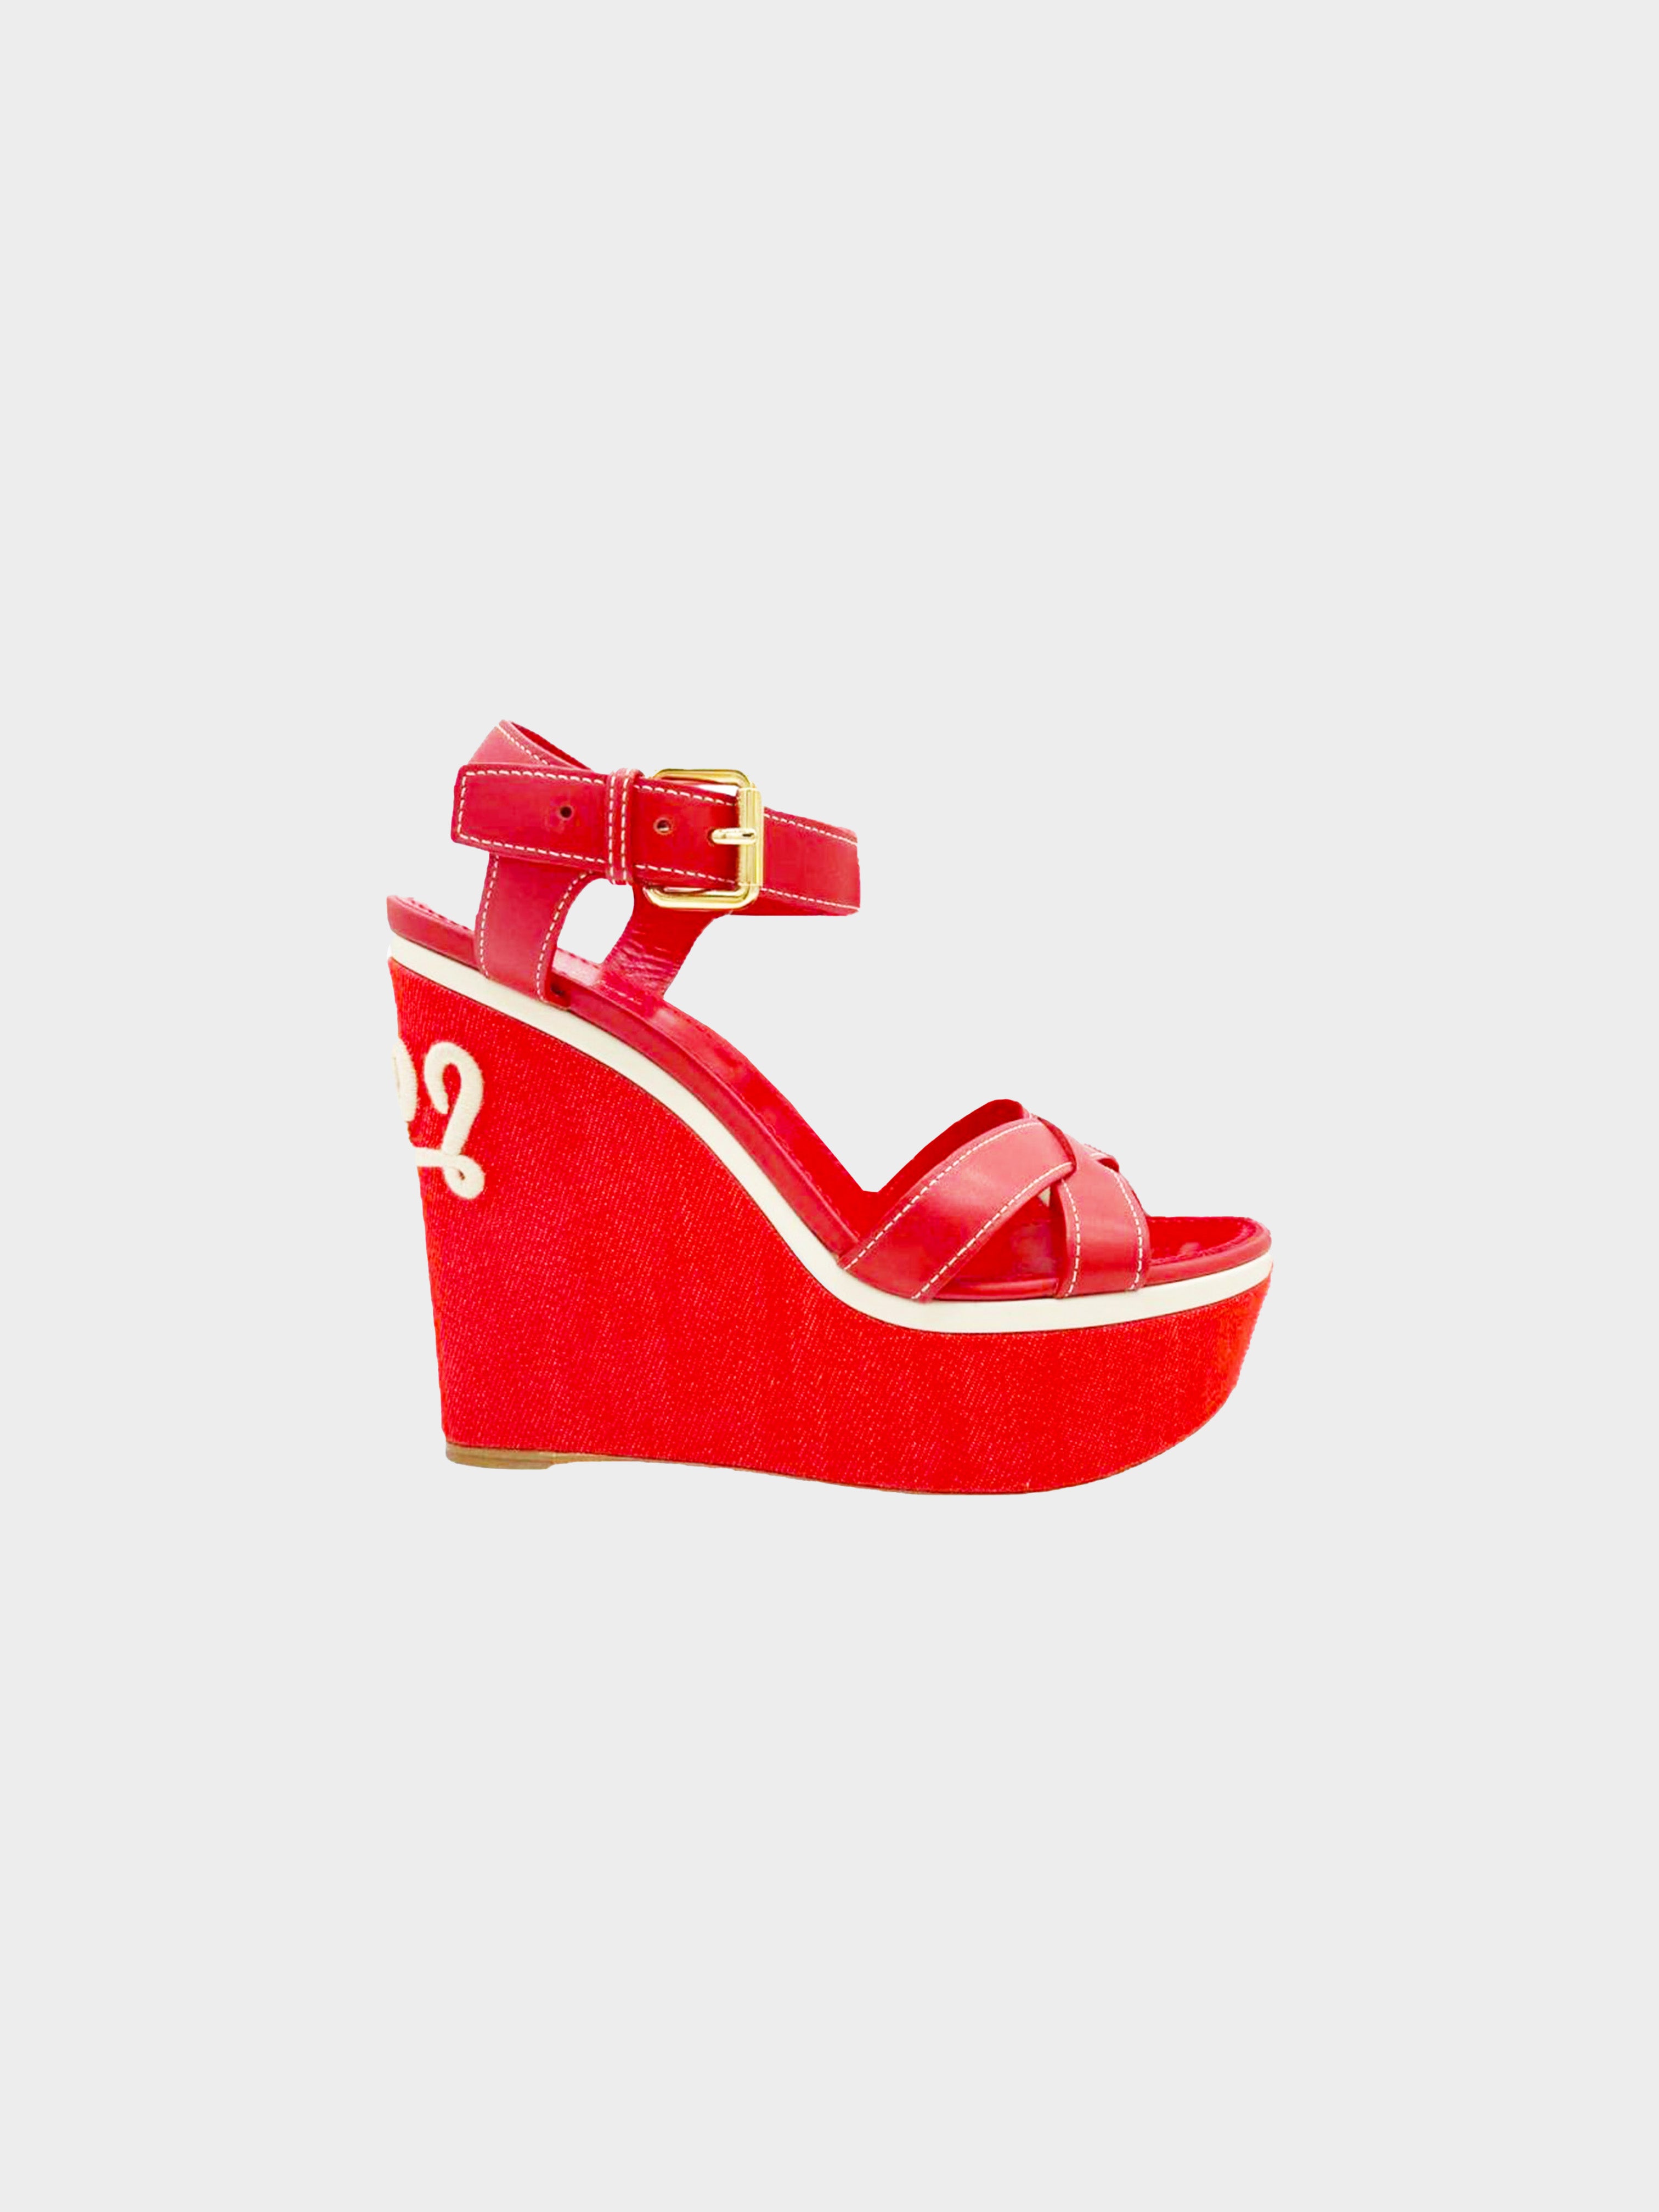 Louis Vuitton 2016 Red Waterfall Wedge Sandals · INTO